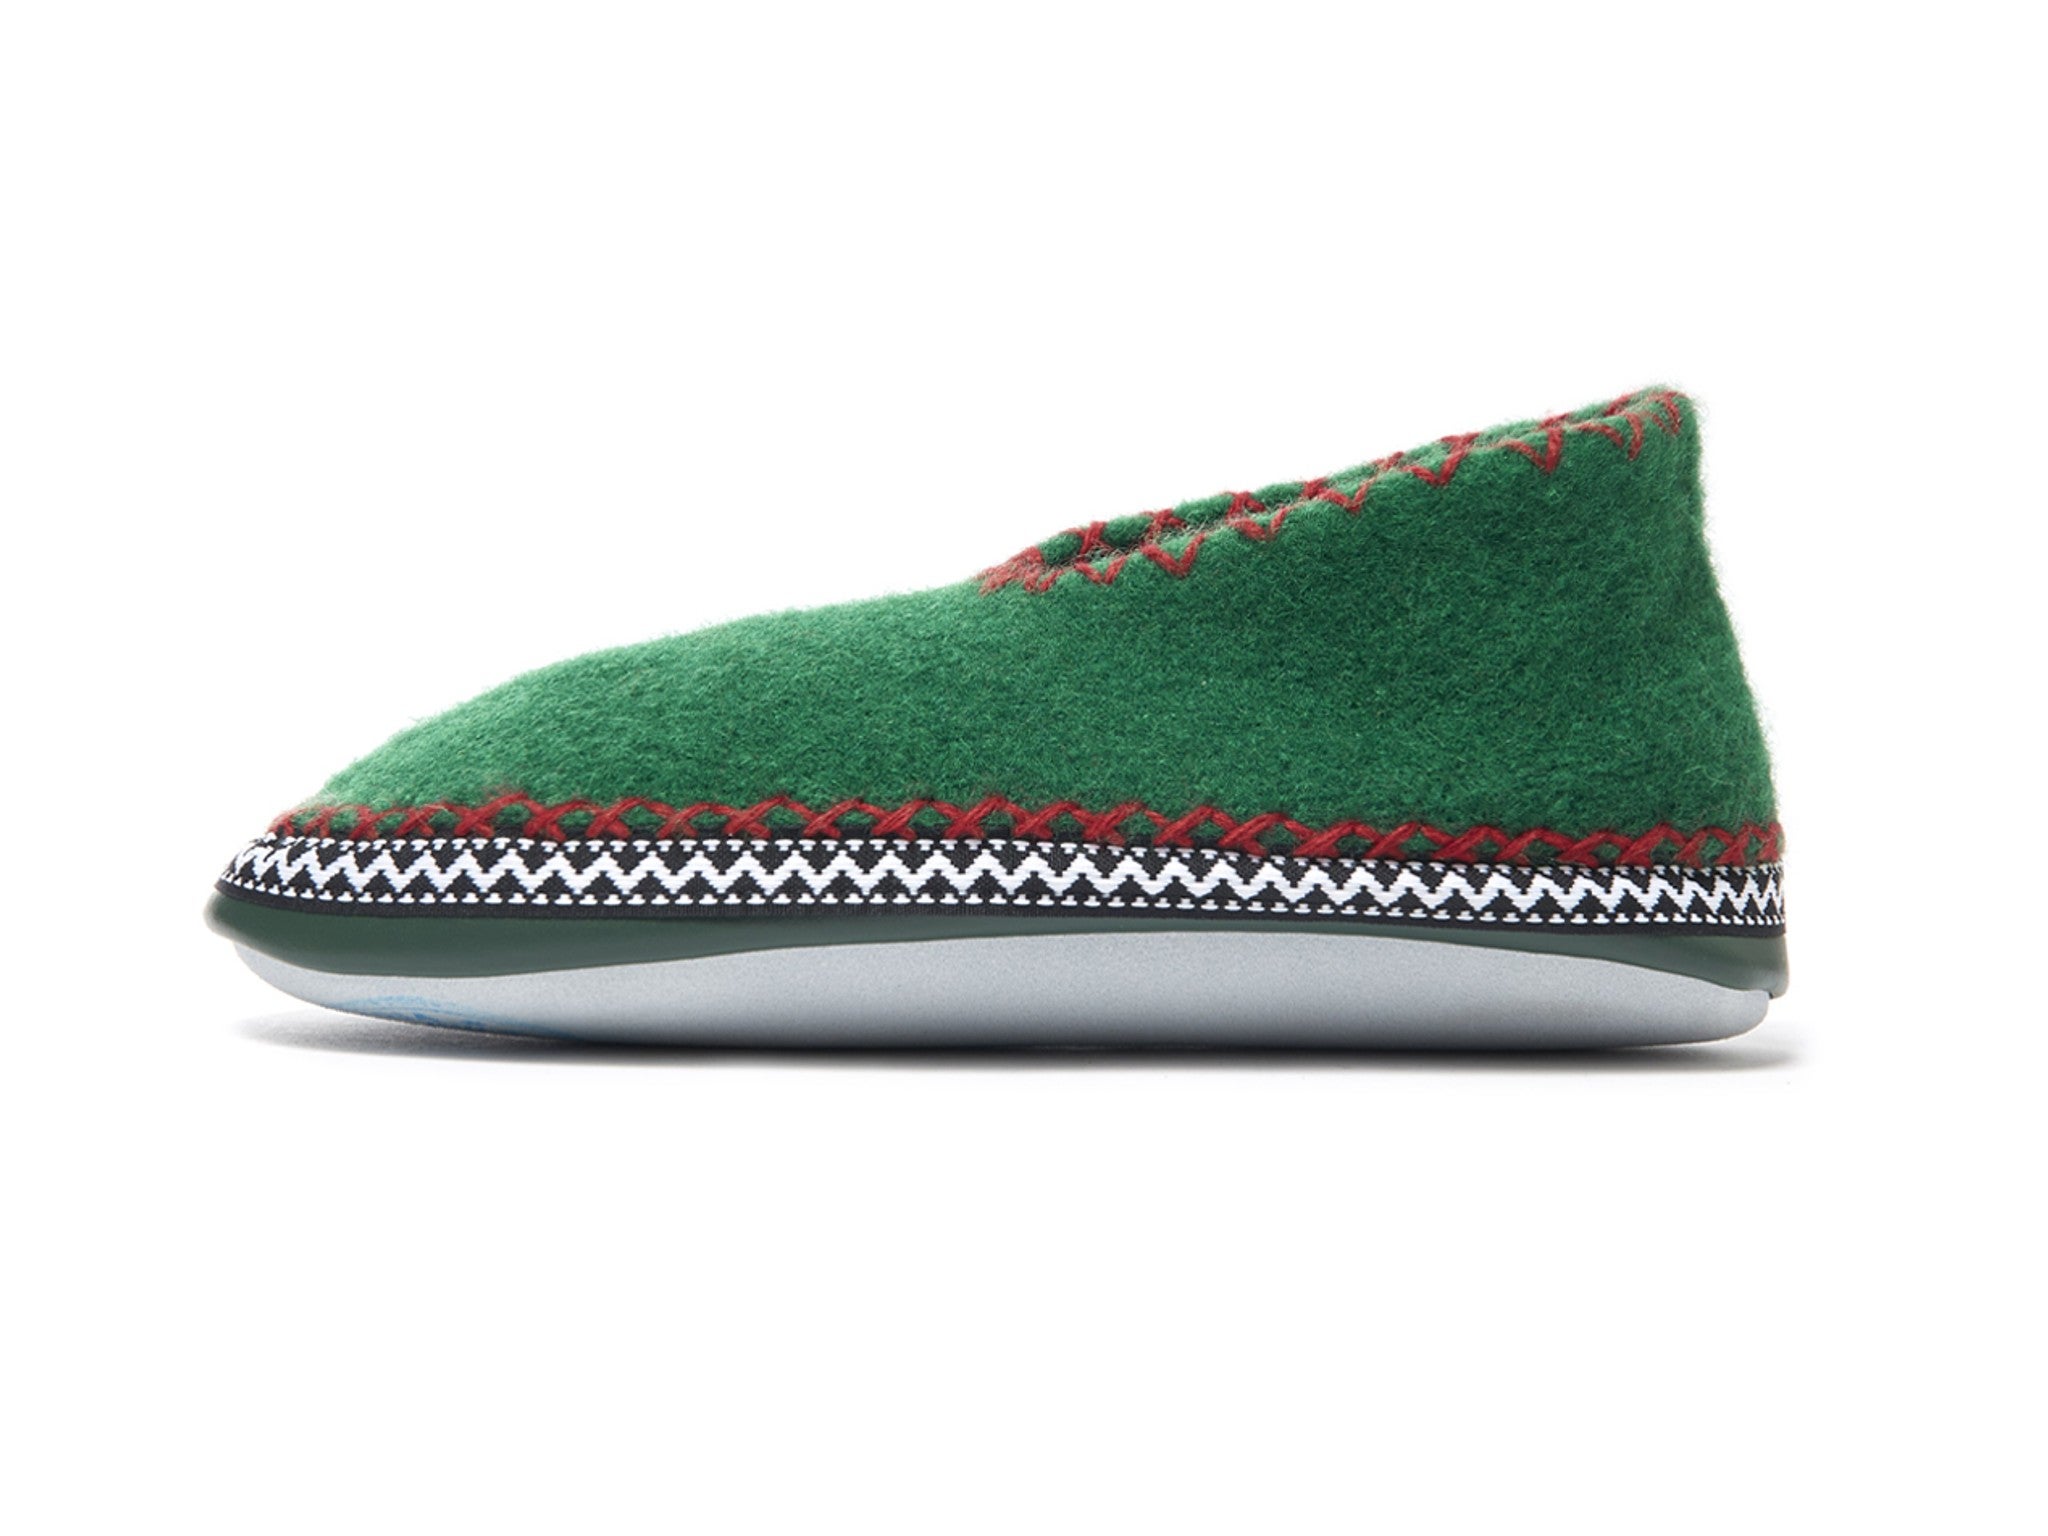 Men's Moccasin Slippers with Soft Suede Sole I Wool Lined